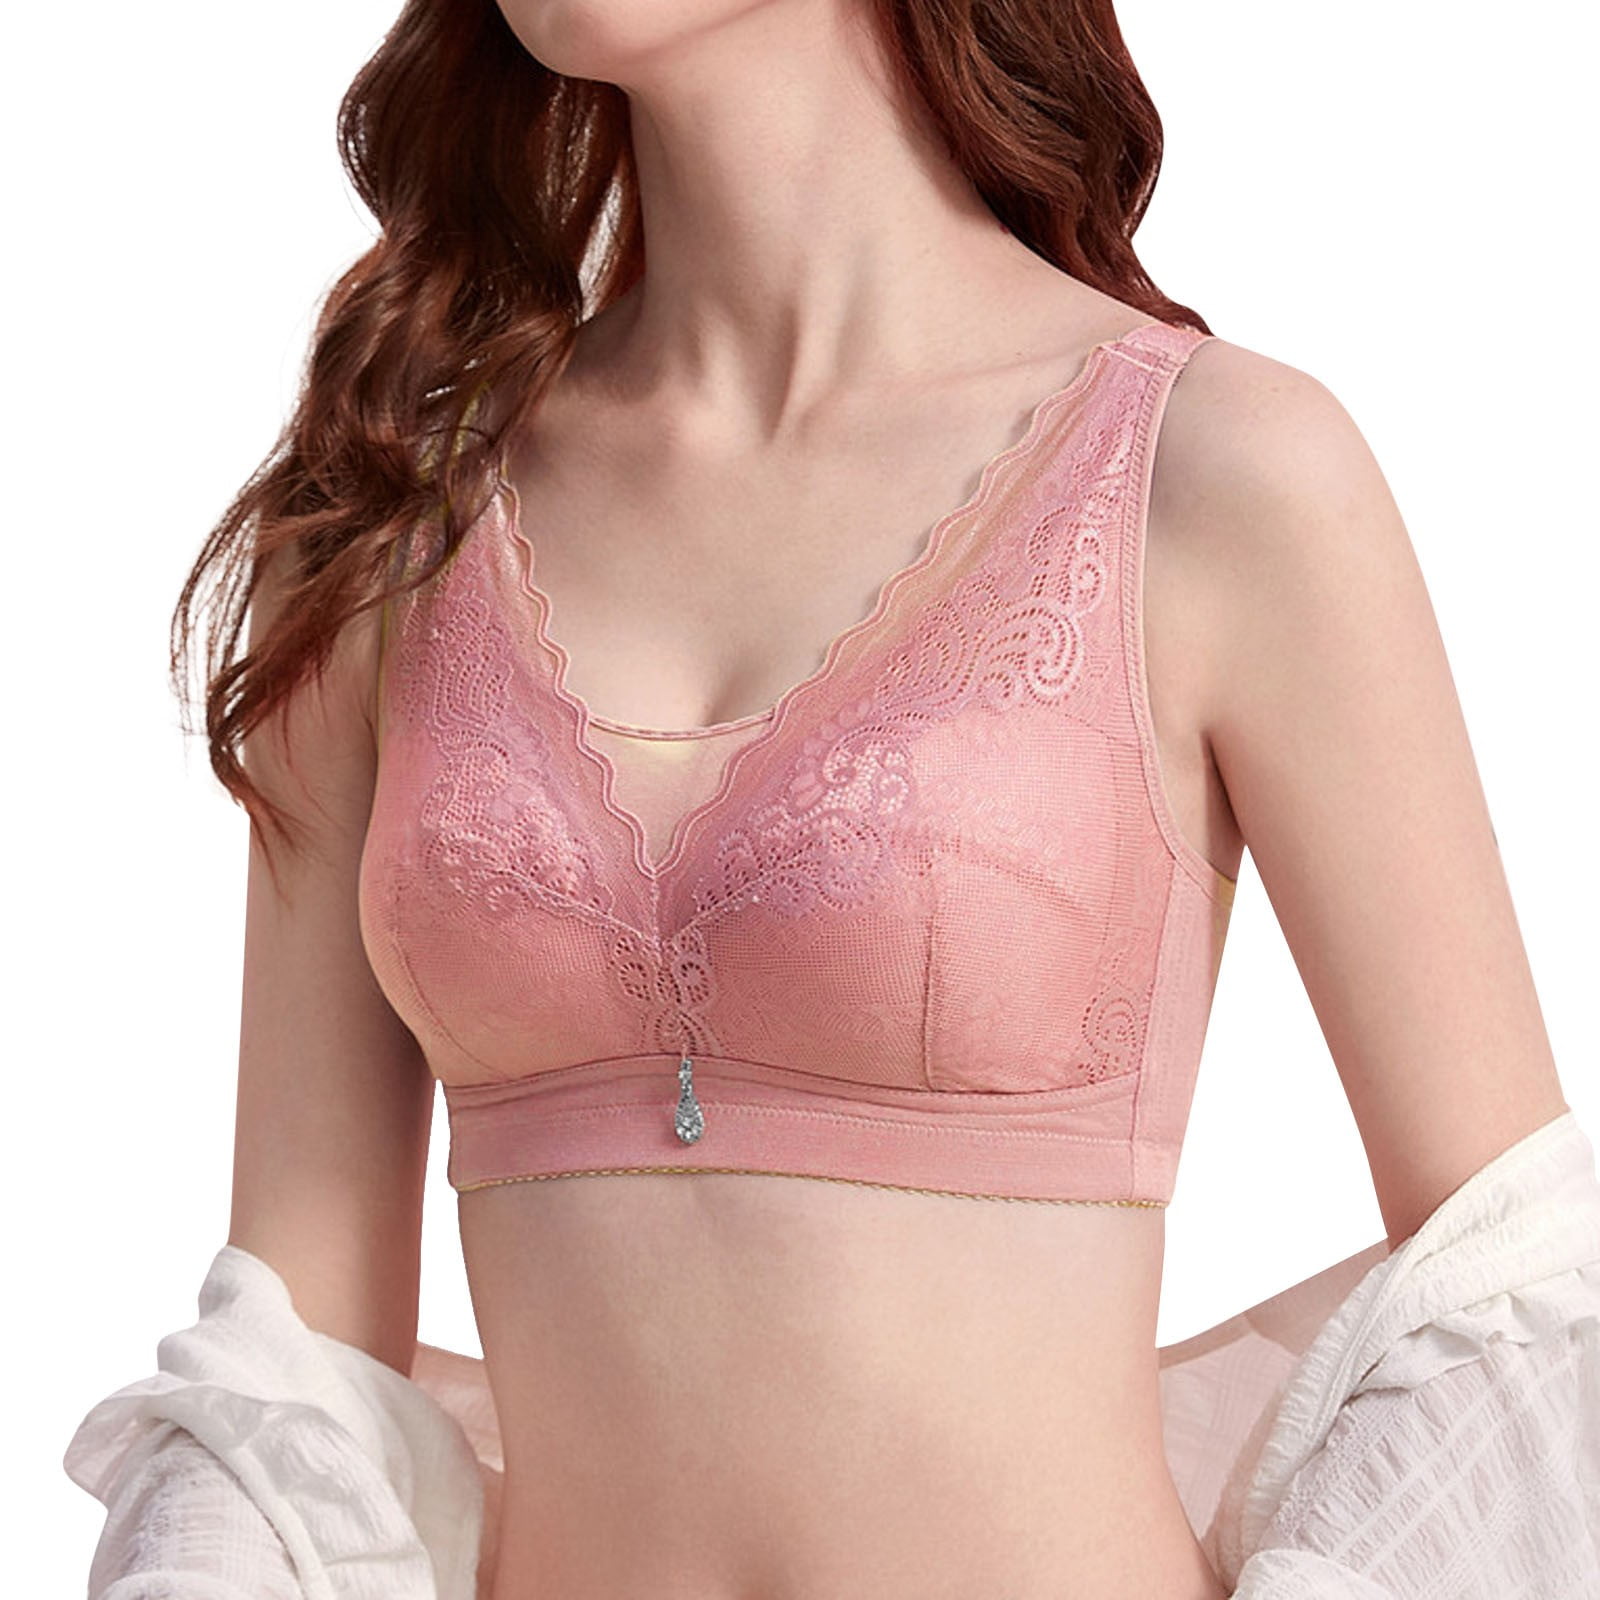 adviicd Womens Sports Bras Comfort Devotion Lace Bra, Smoothing  Full-Coverage T-Shirt Bra for Everyday Comfort, Comfortable Lace Bra Pink  42C 